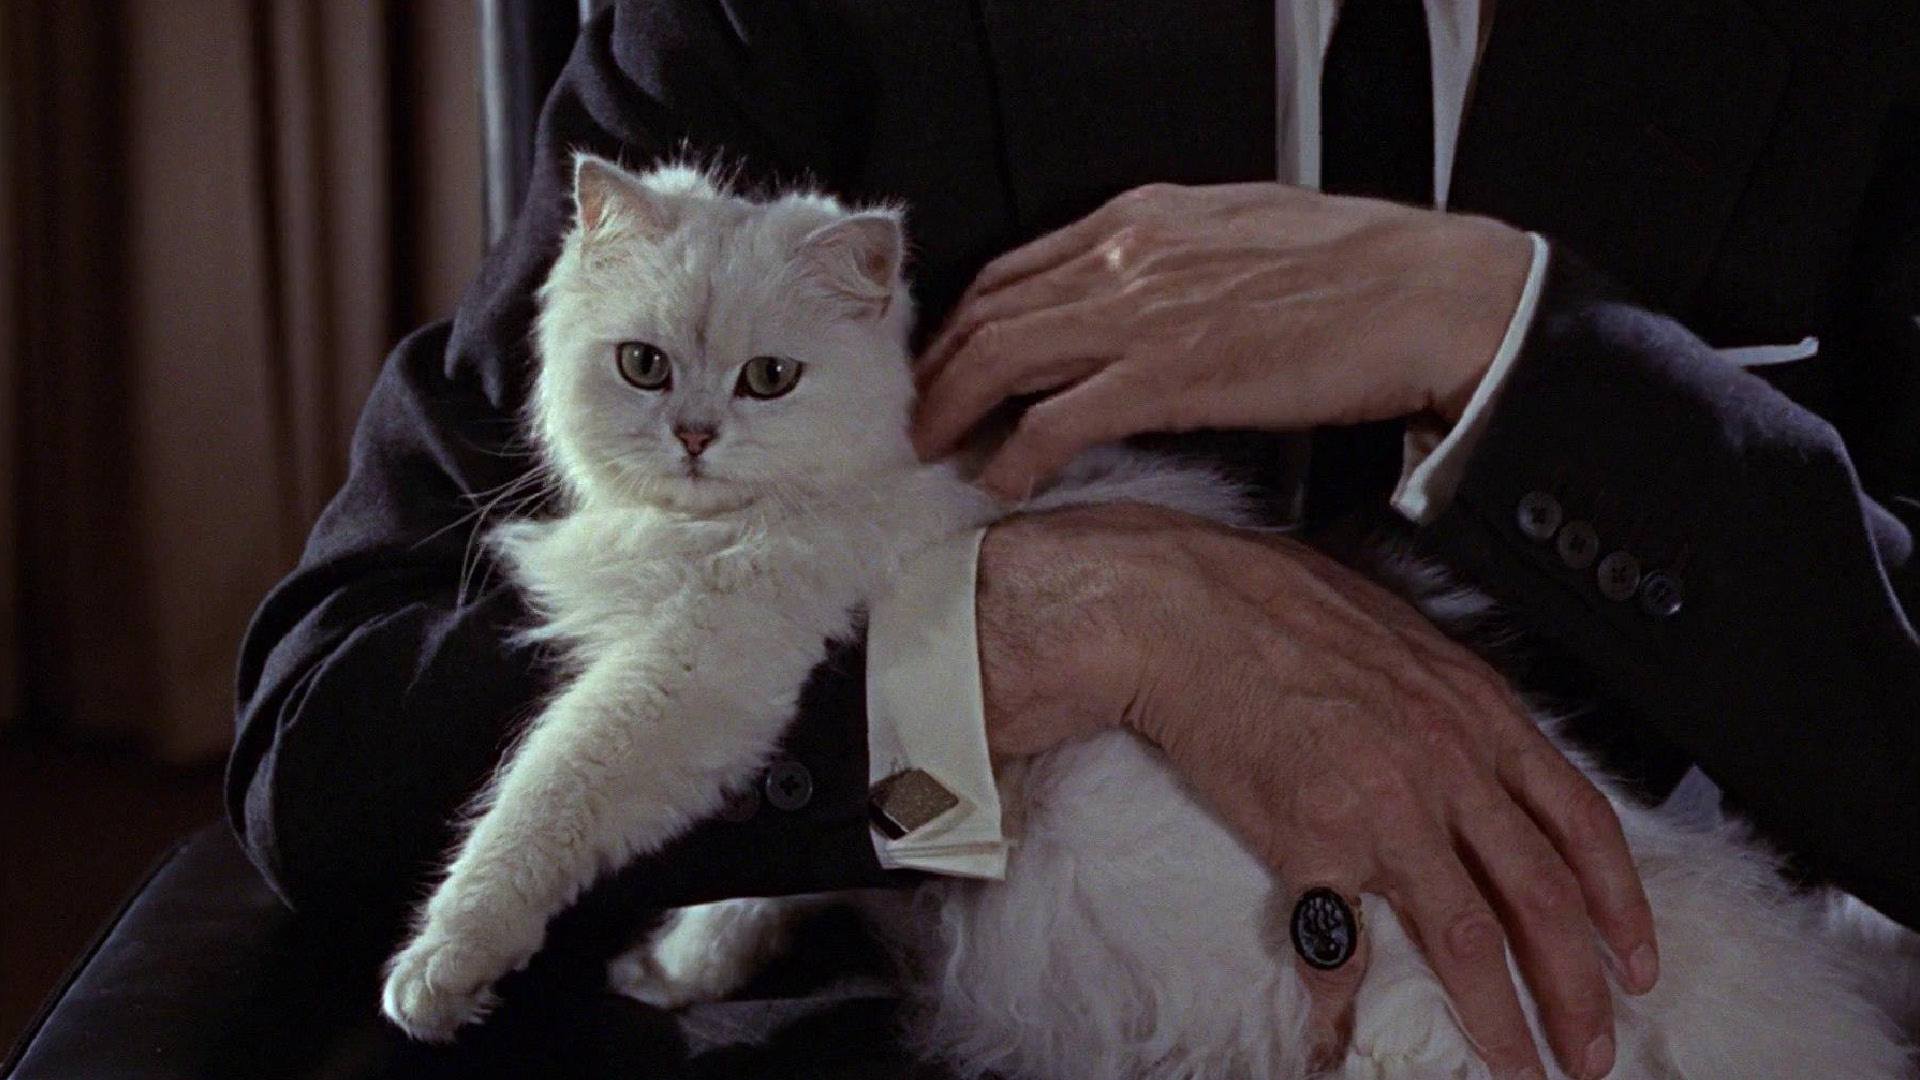 FROM RUSSIA WITH LOVE film still of a white cat in man's arms